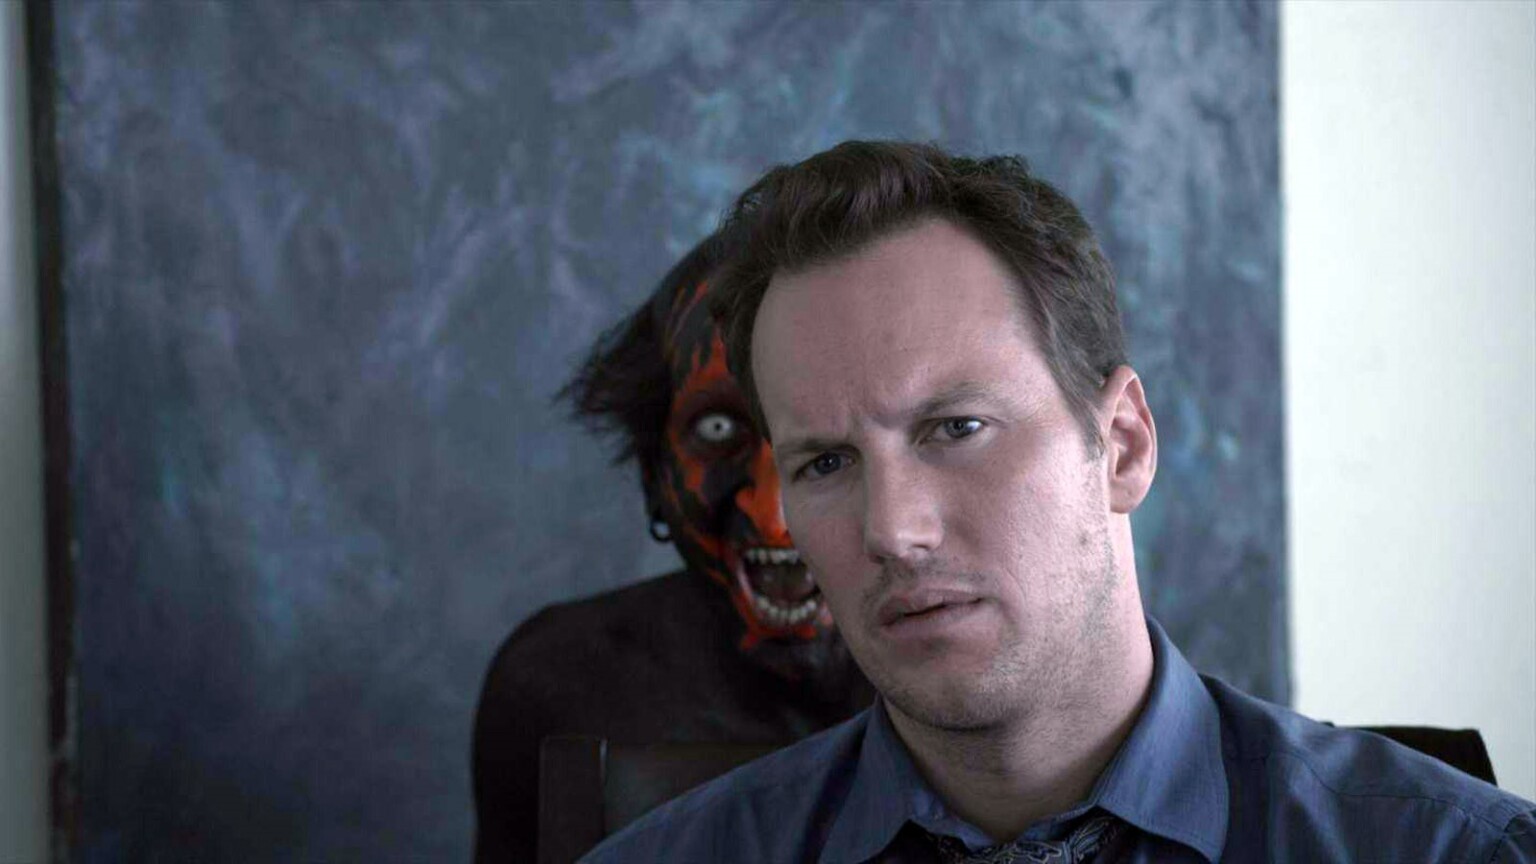 How to Watch Insidious Movies in Order? | TechNadu - How To Watch The Insidious Movies In Order